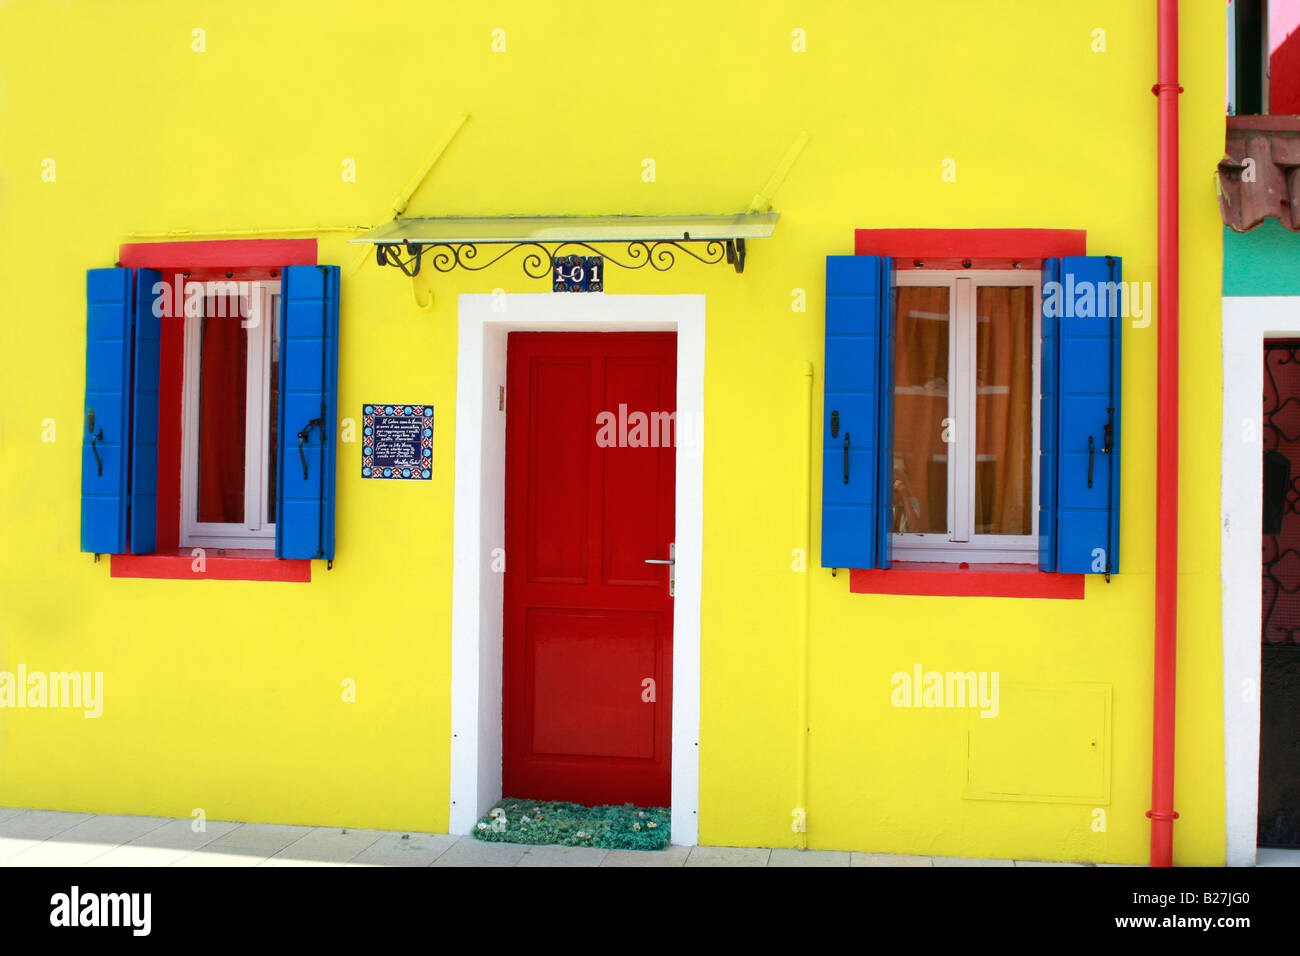 typical vividly  colorful painted houses line the streets and canals of the popular Venetian island of Burano Stock Photo